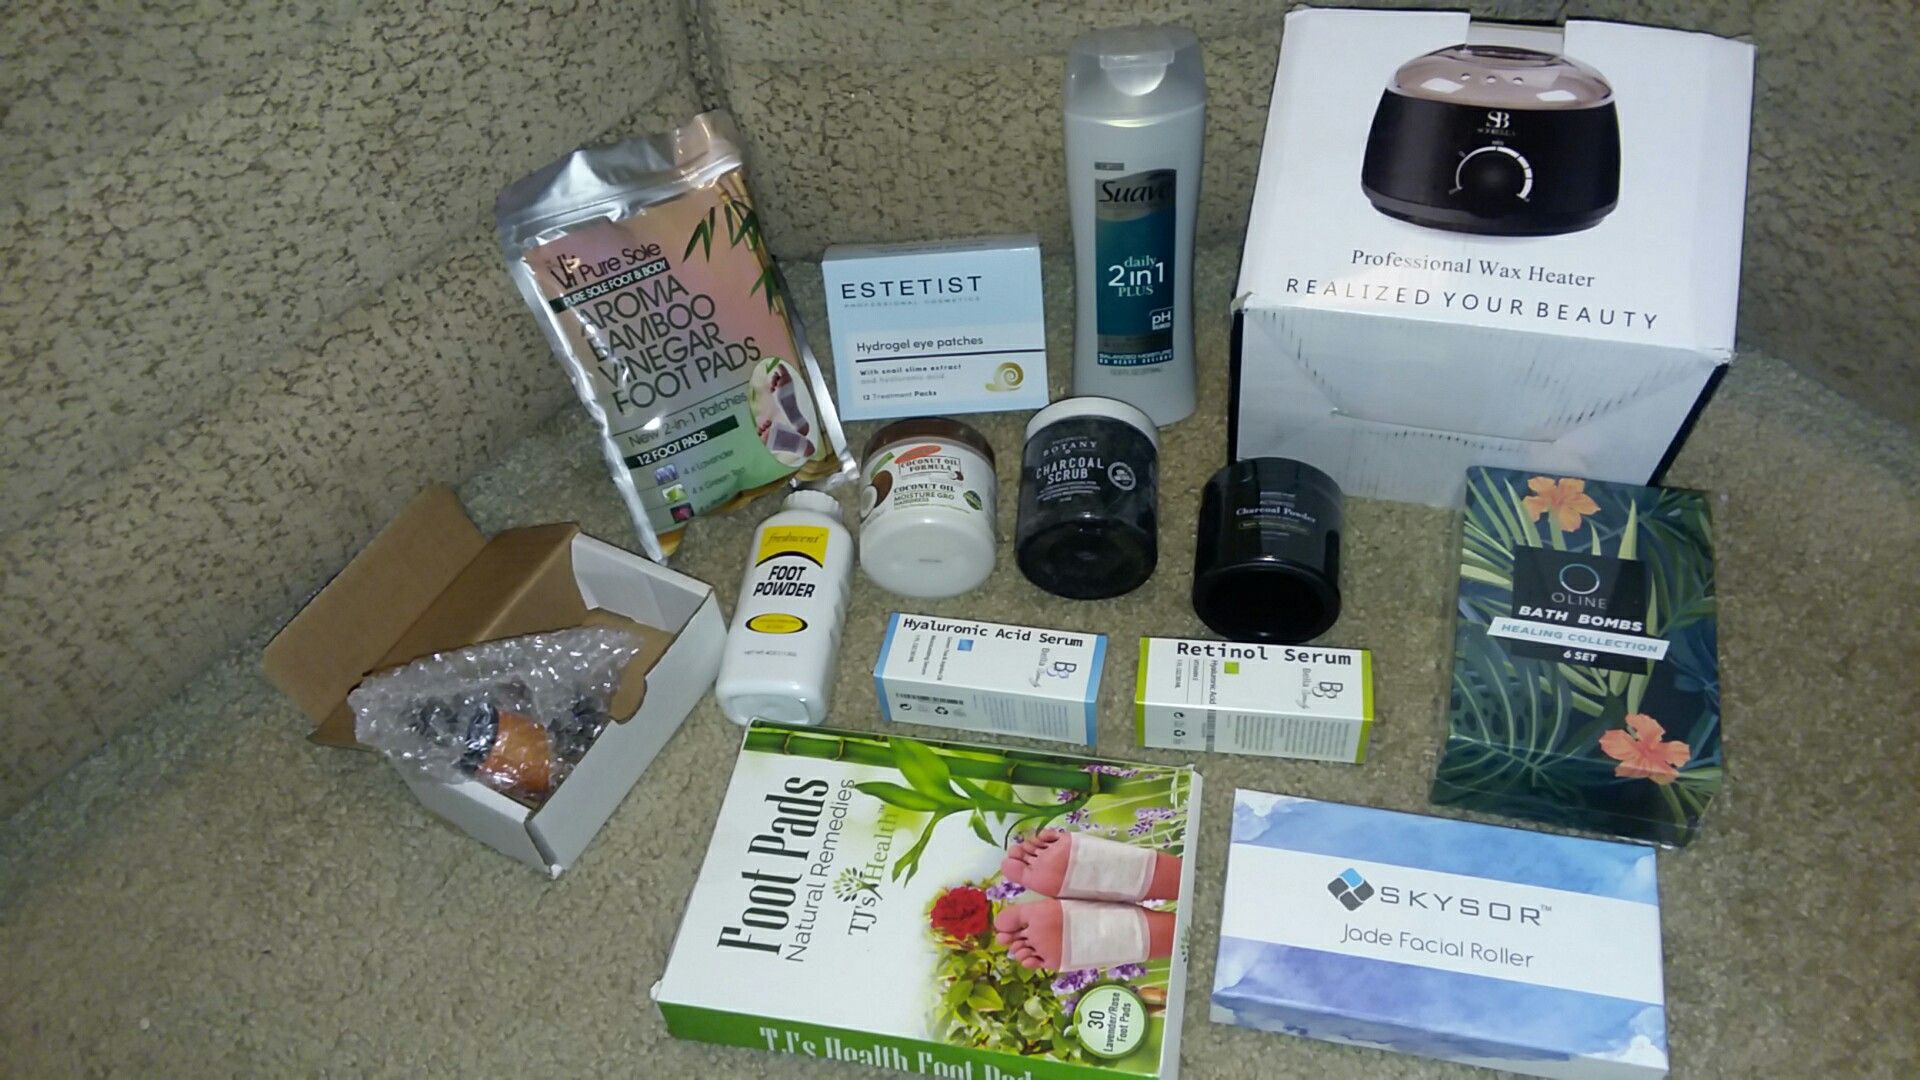 Lot of brand new beauty supplies including professional wax heater. ALL brand new.